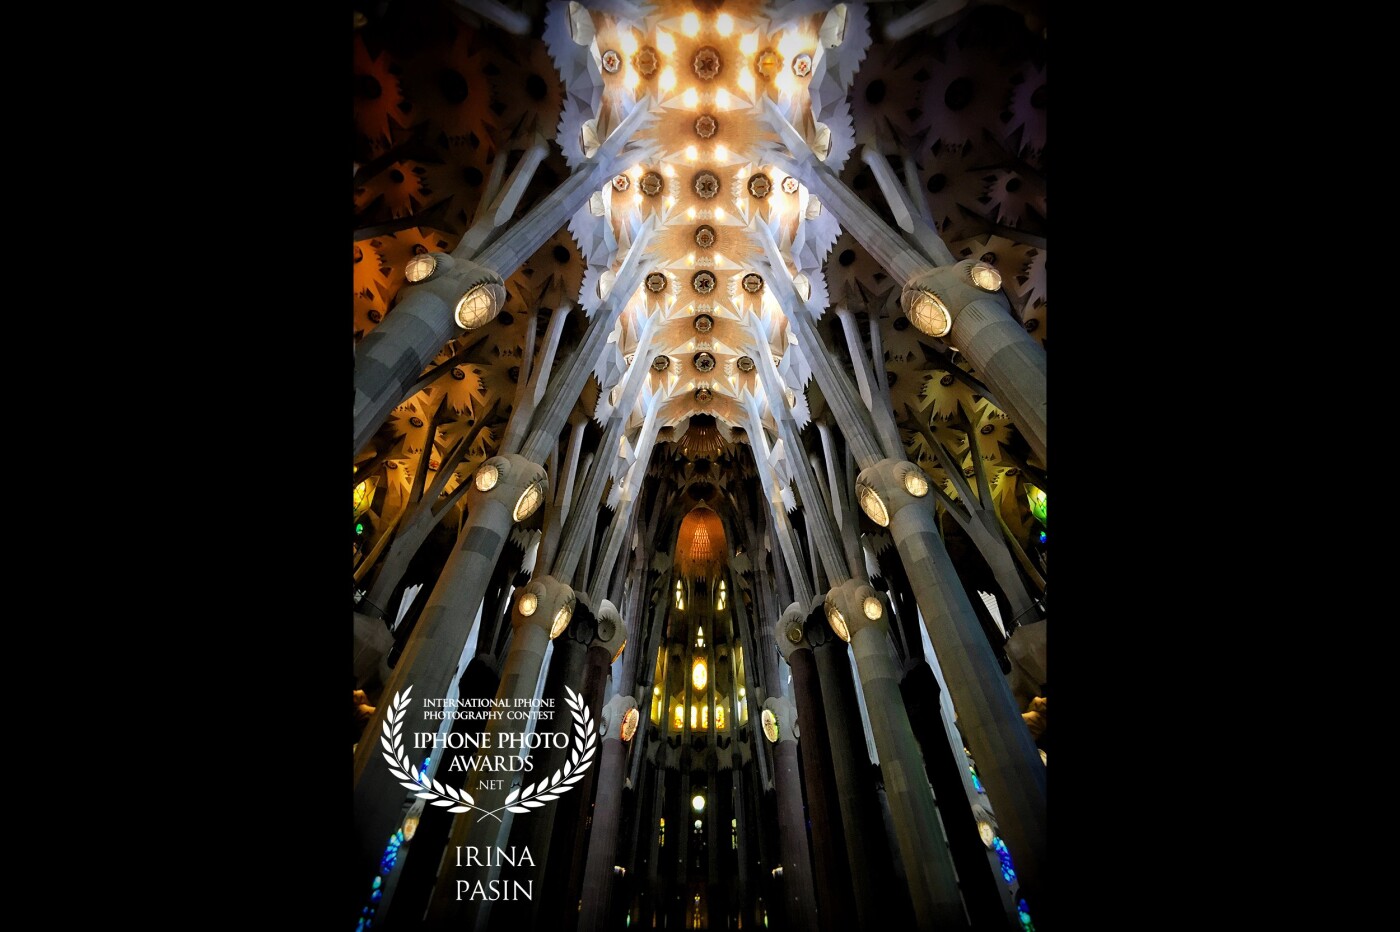 the most breathtaking view of a man made structure I’ve seen. walking into Sagrada Familia all expectations are wiped away and taken to another level. it feels like you’re in a forest surrounded by the trees and not in the building made by a man. 